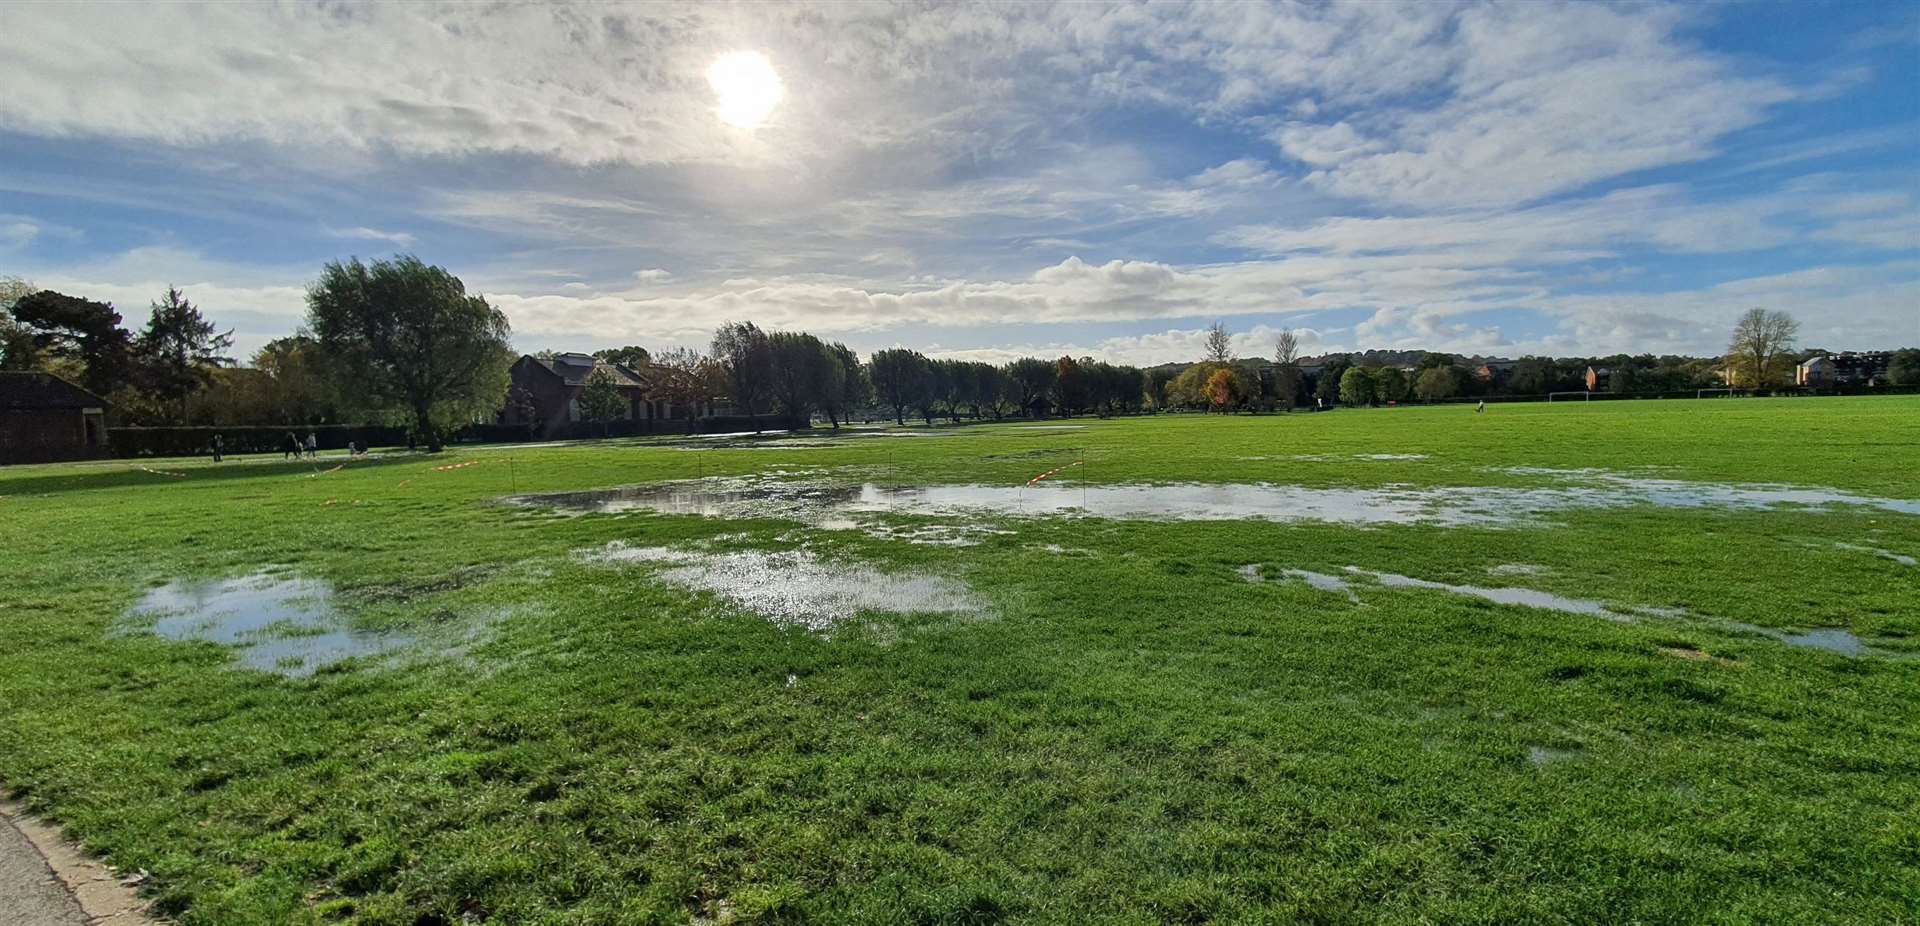 Tonbridge Park was flooded causing the fireworks display to be cancelled tonight. Picture: Tonbridge Round Table